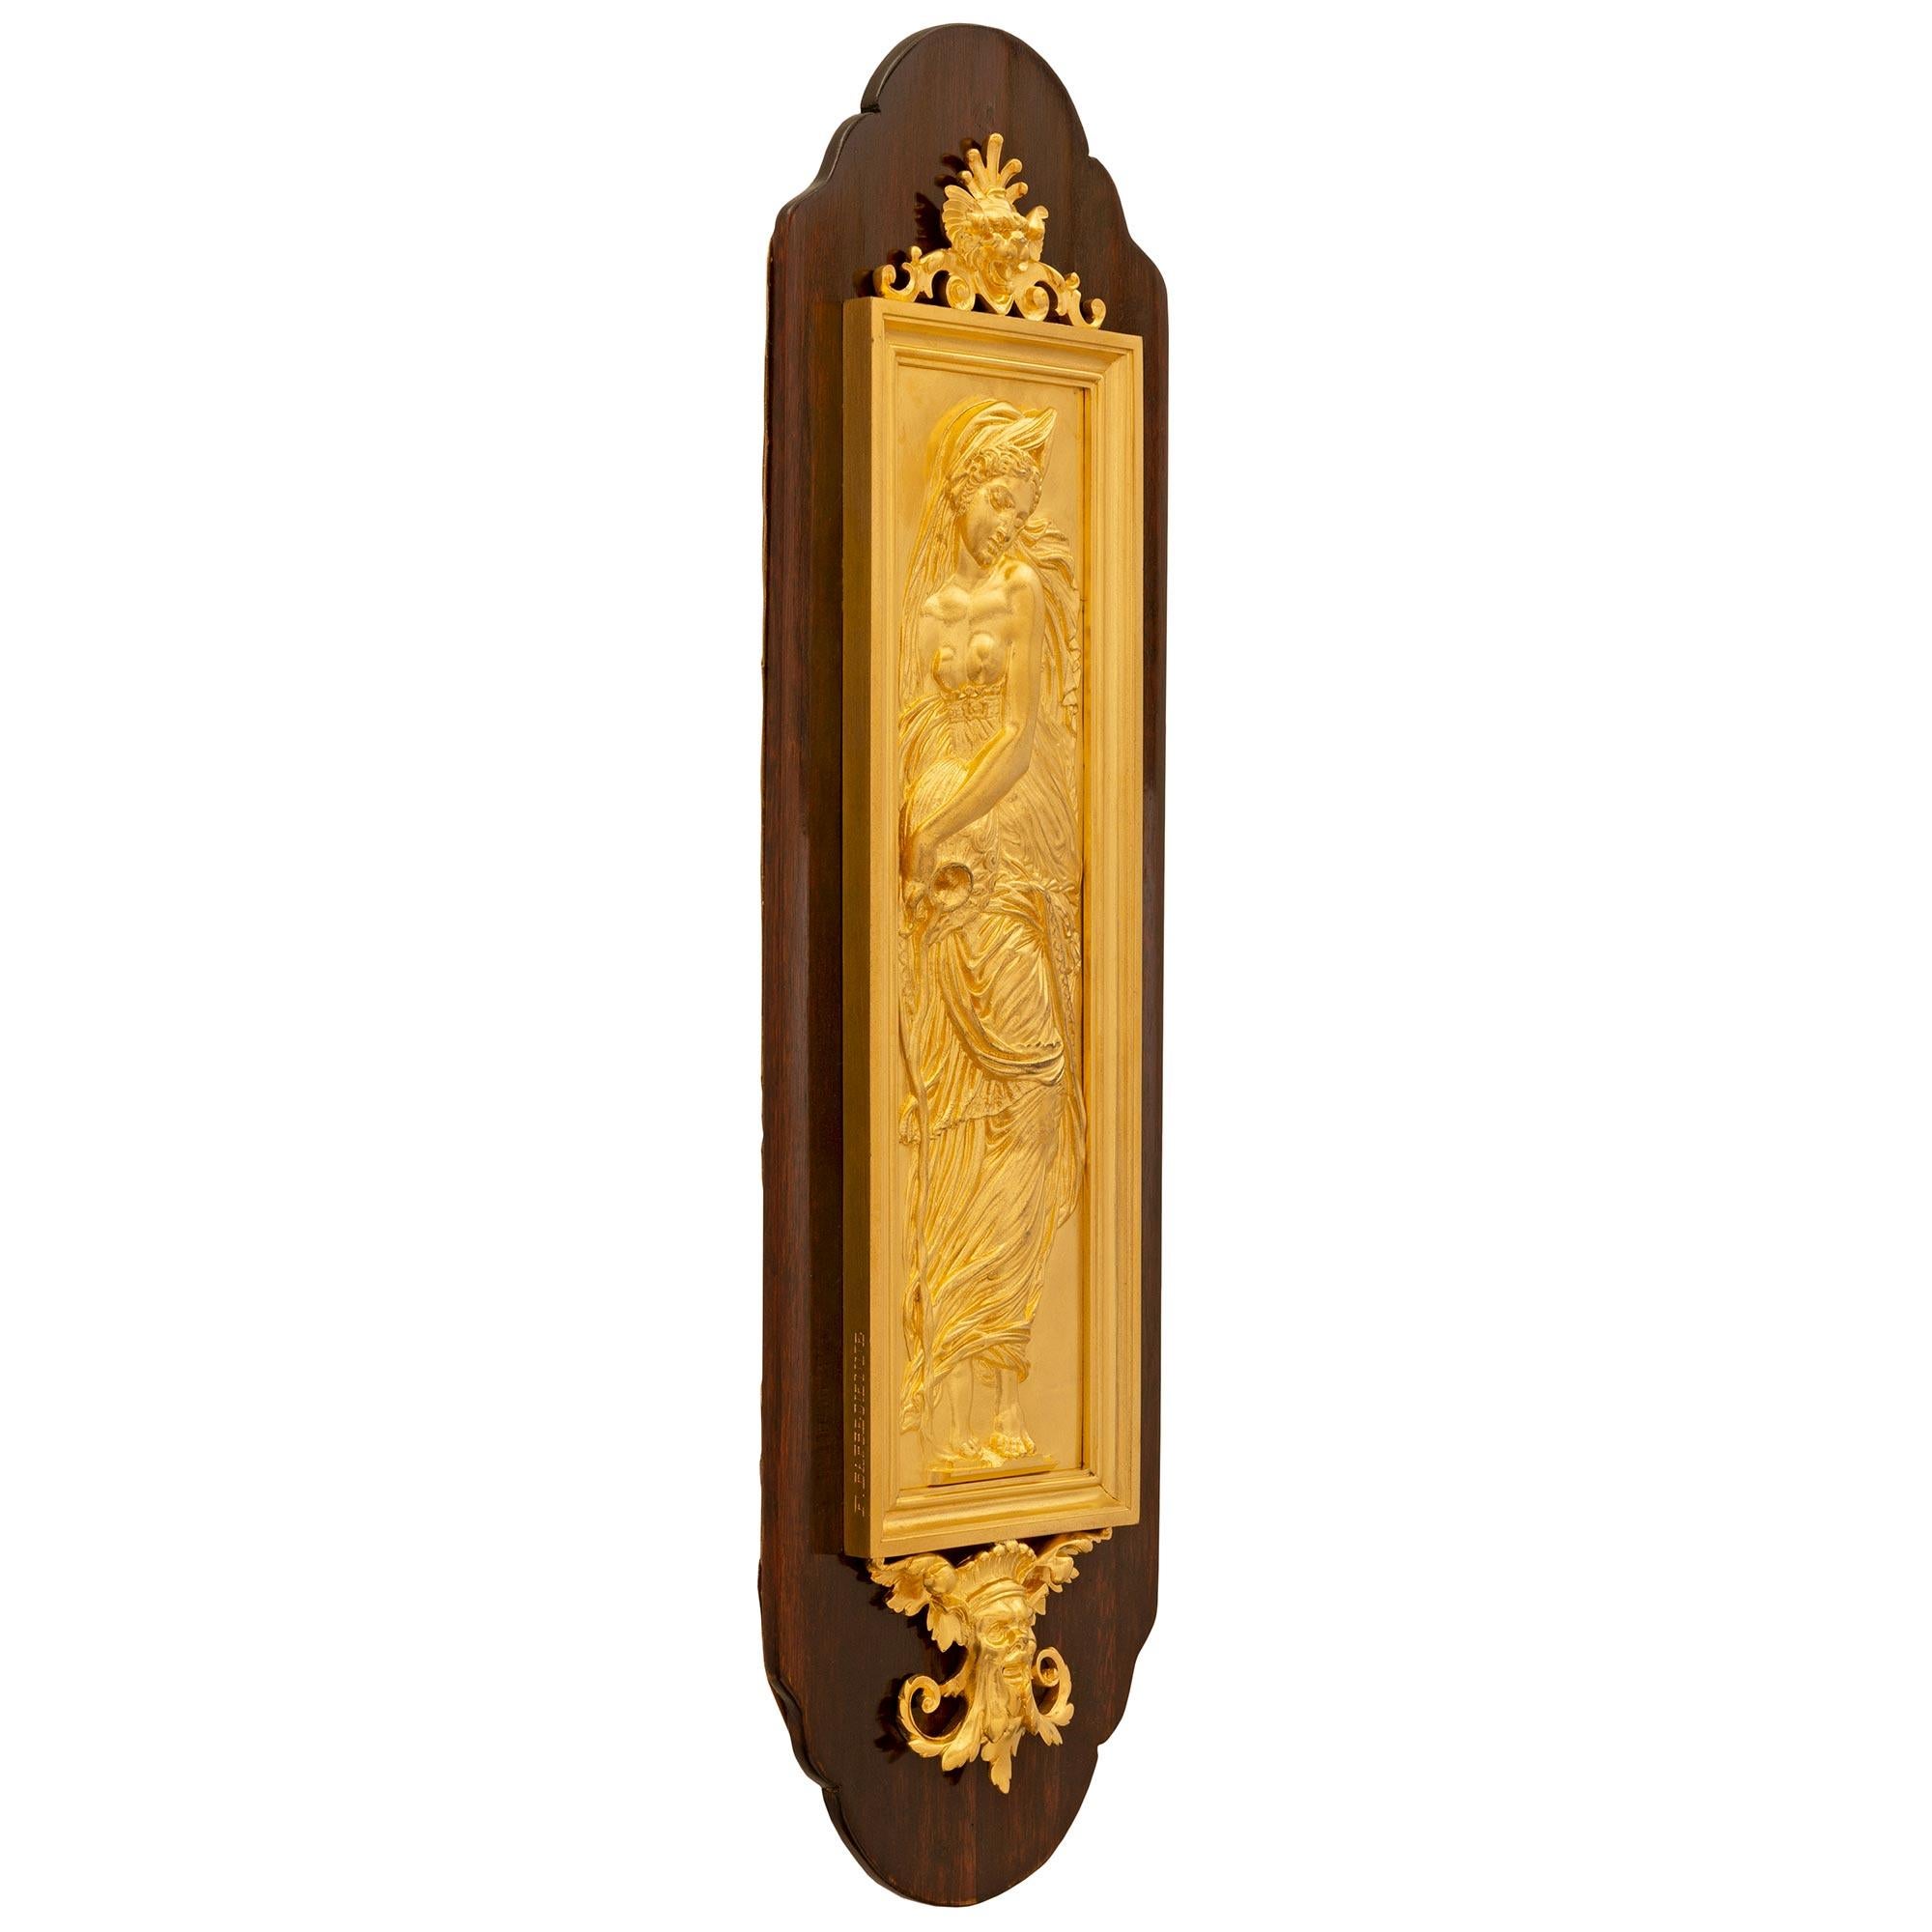 A remarkable pair of French 19th century Louis XVI st. Belle Époque period ormolu and Mahogany decorative wall plaques signed F. Barbedienne. Each plaque is set on an elegant Mahogany backplate with fine scalloped bases and tops. The central ormolu